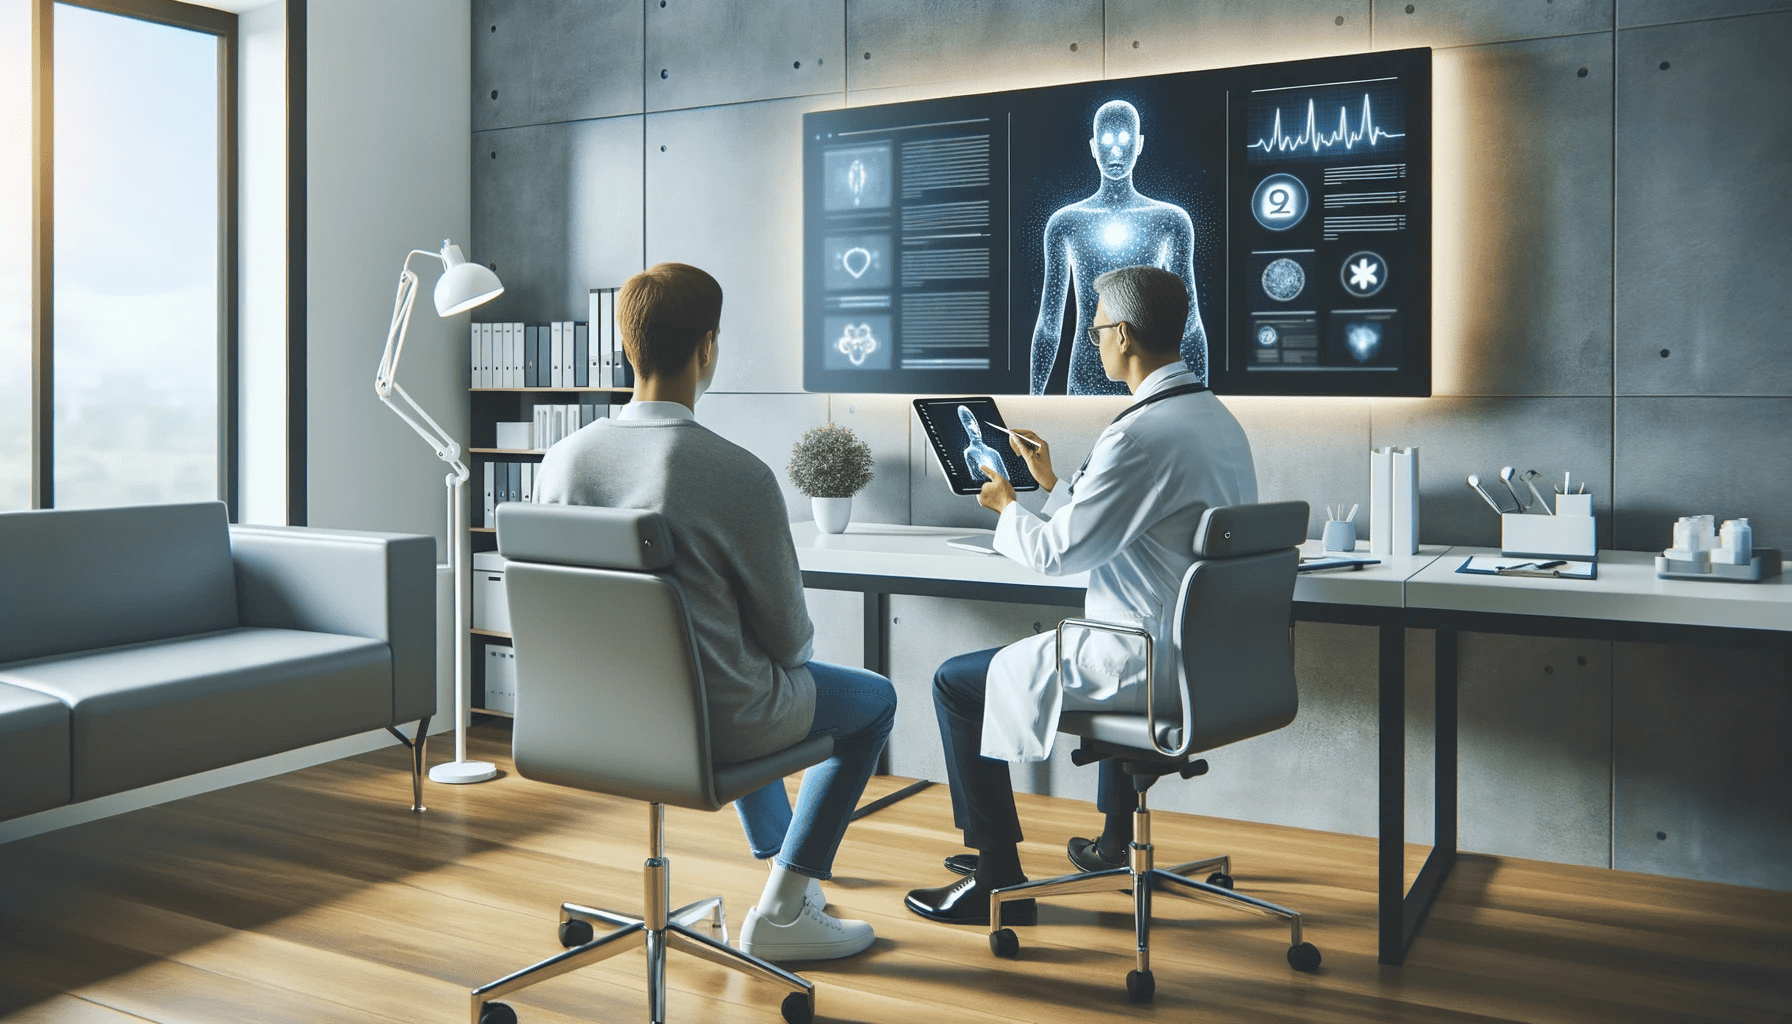 AI is Revolutionizing Every Aspect of Healthcare